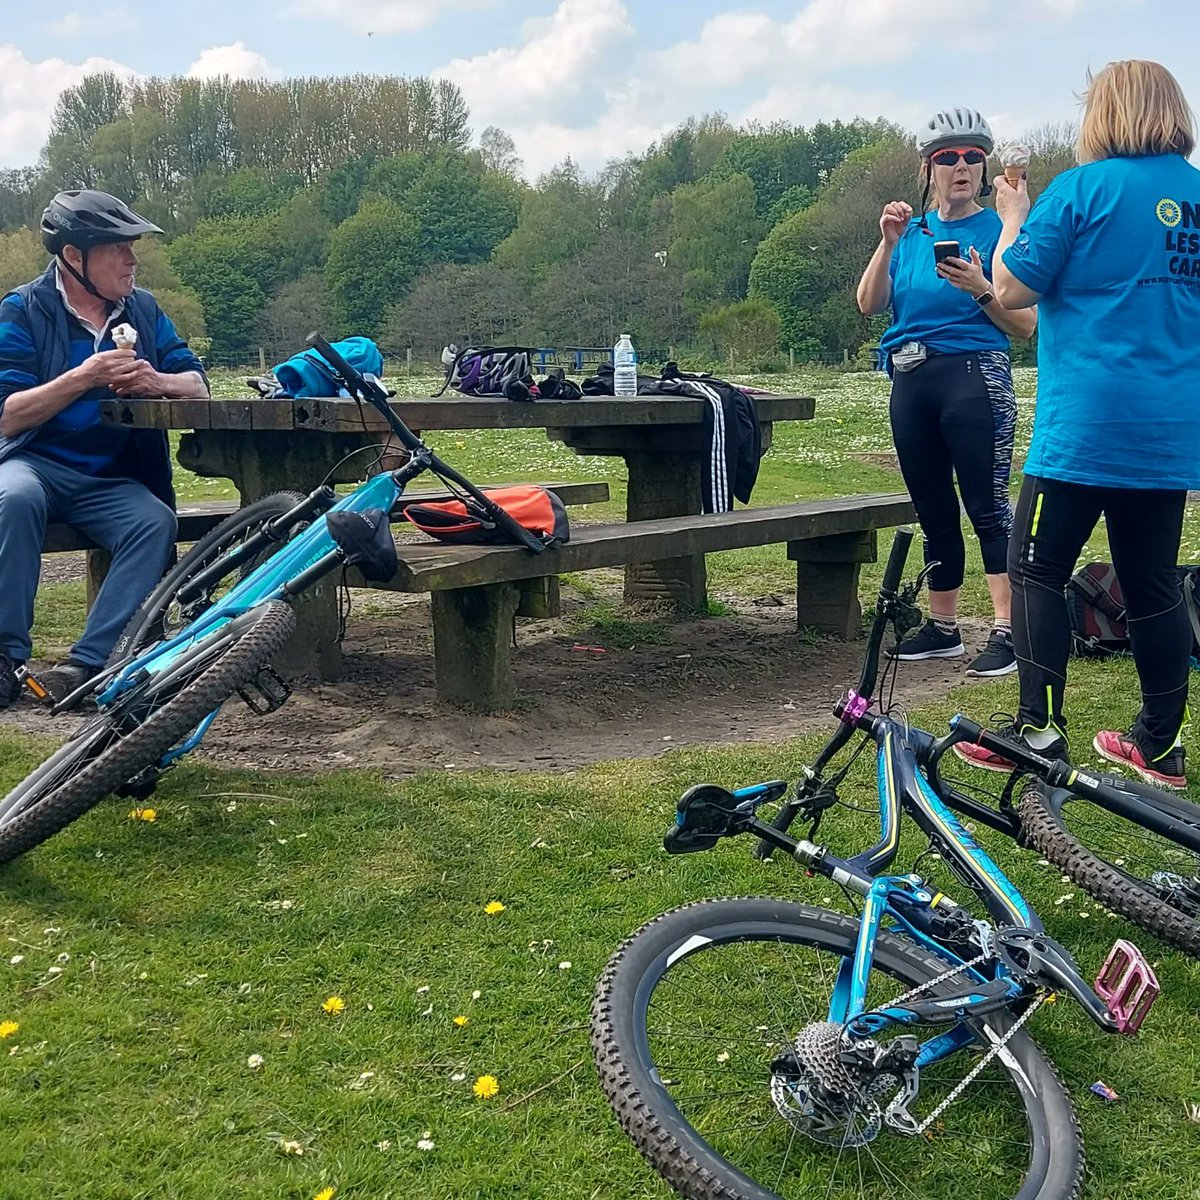 Great, sunny afternoons ride with our over 40's group. Even time for a well deserved ice cream half way through a quite hilly route.
@TNLComFund @BritishCycling  @BoltonCVS  #cycleandstride @BeeNetwork  #placestoride  #onelesscar